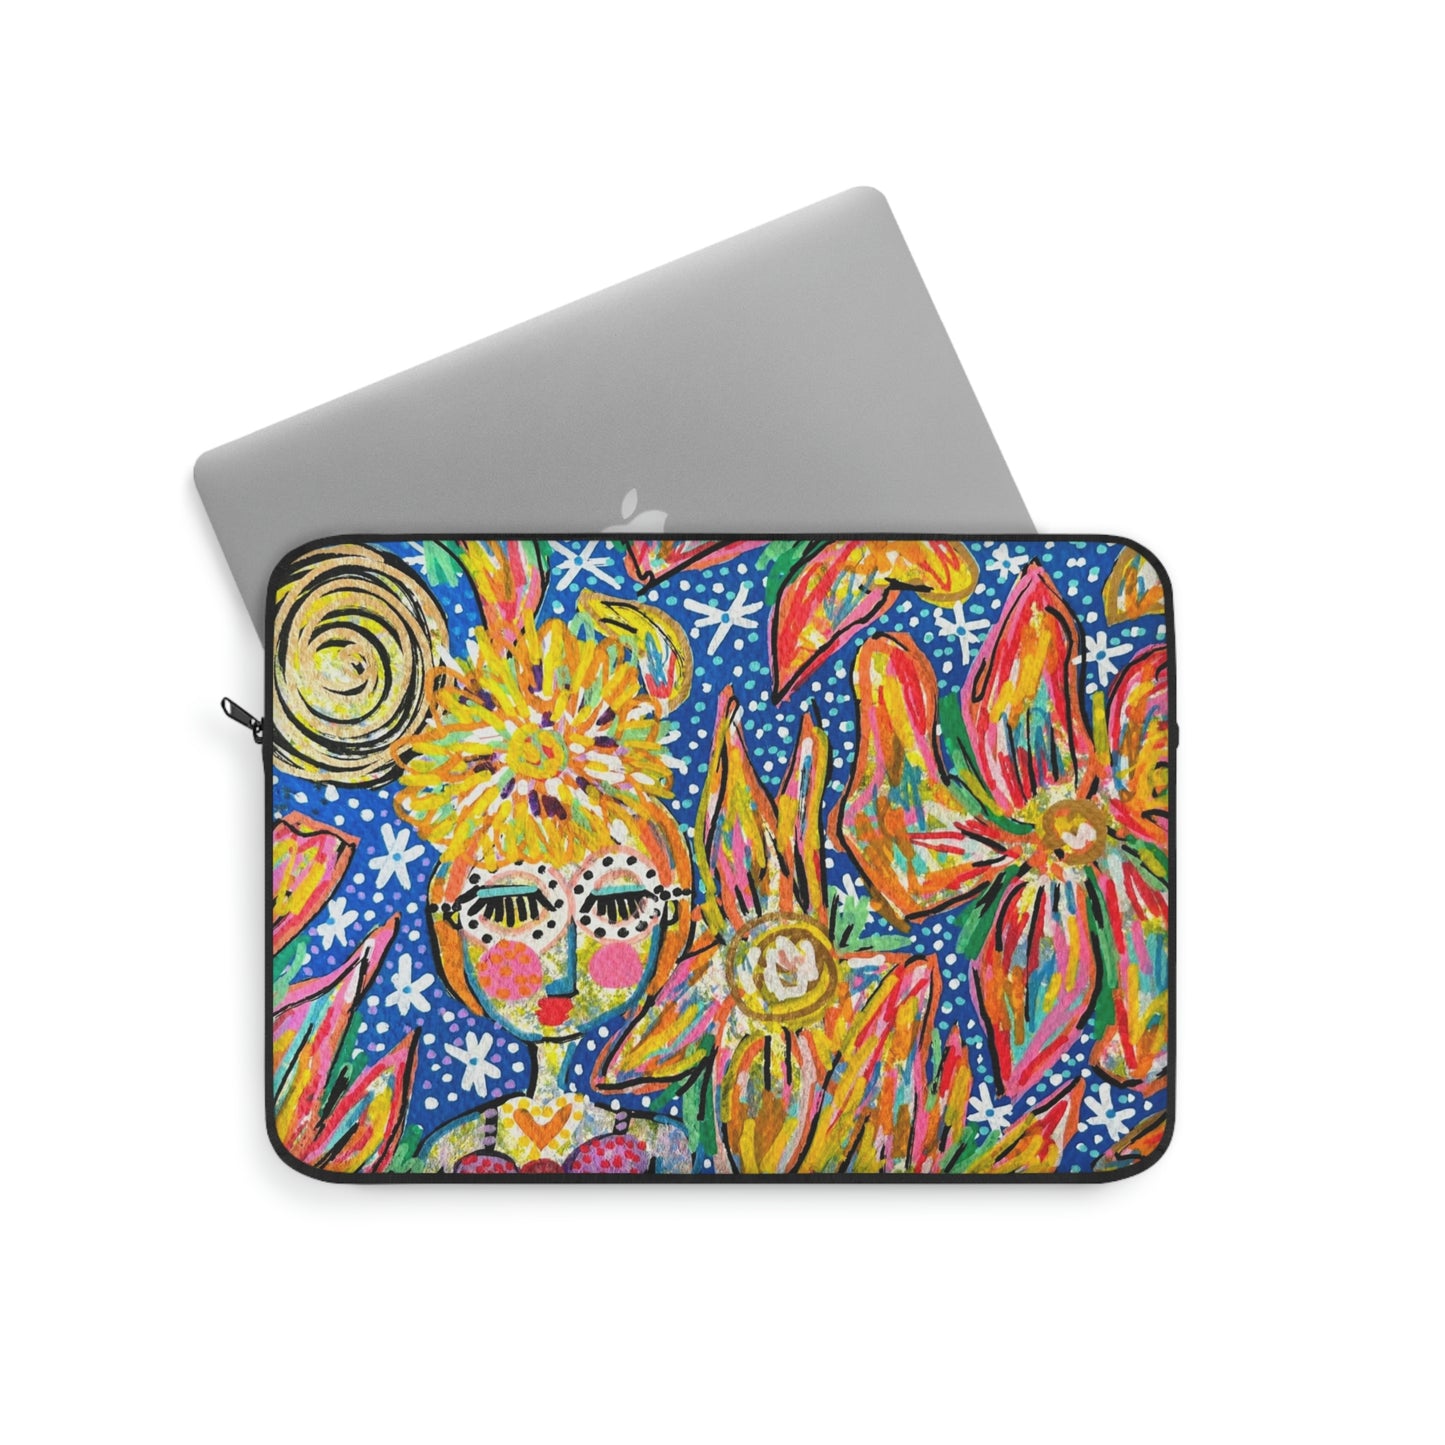 "May All Your Dreams Come True" Laptop Sleeve